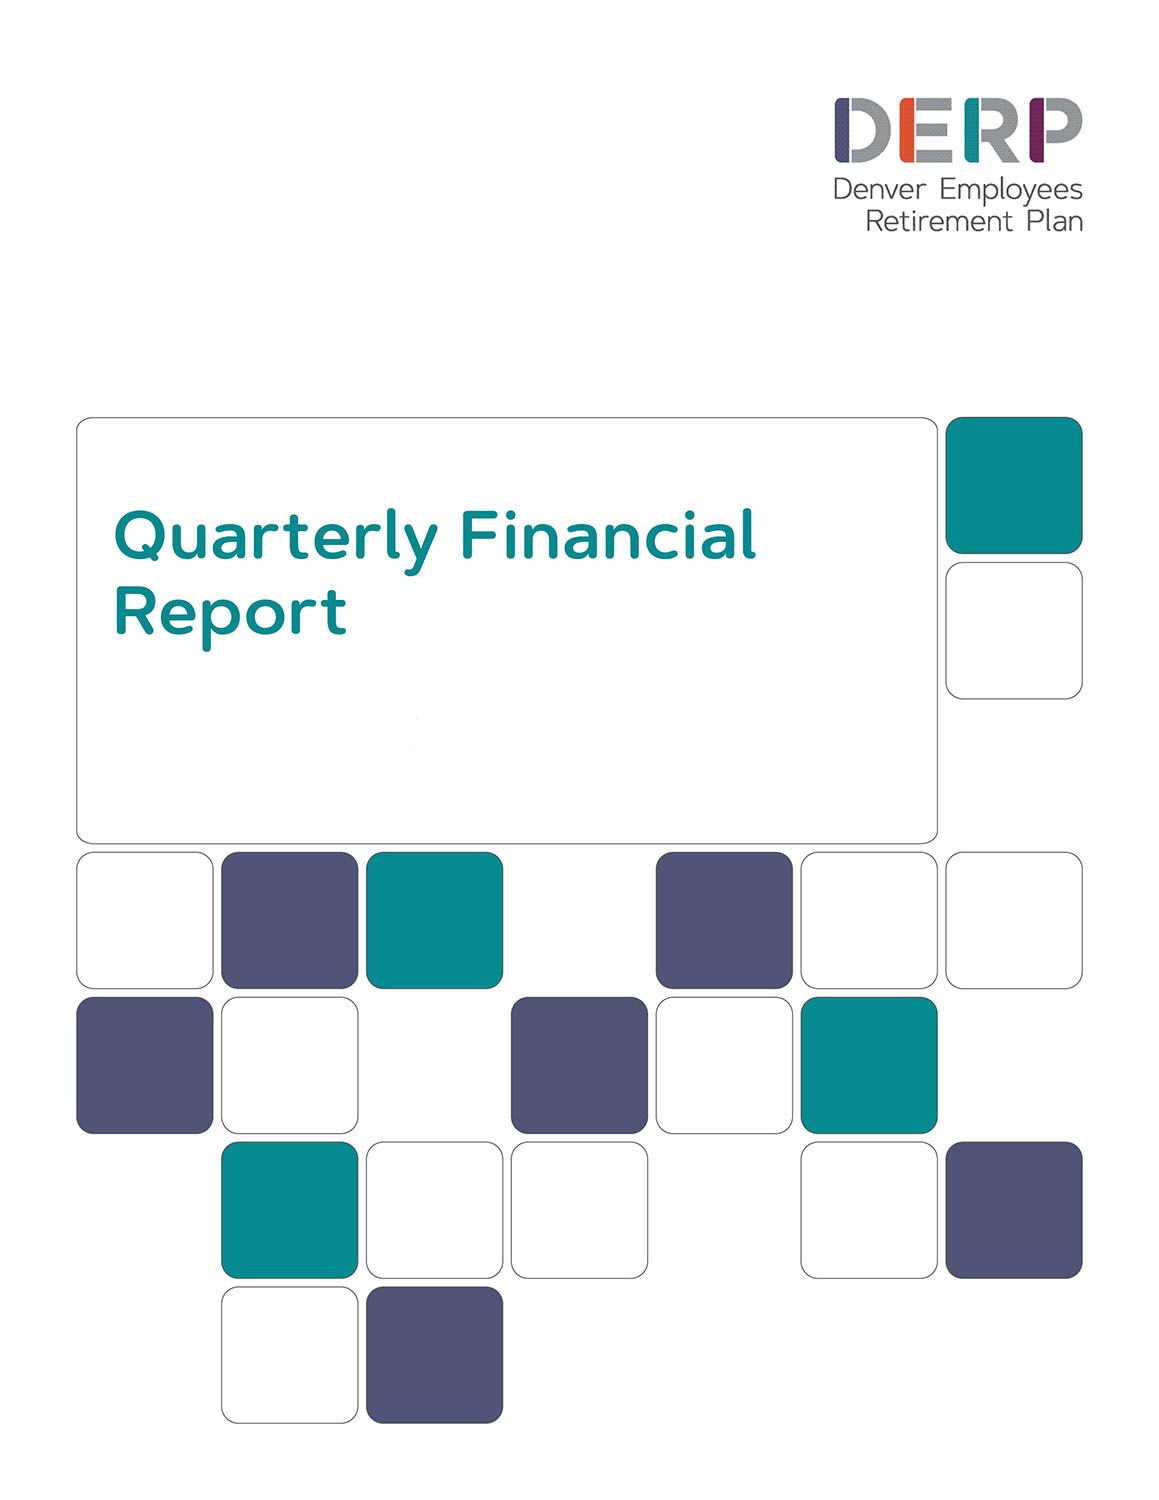 DERP Quarterly Financial Reports